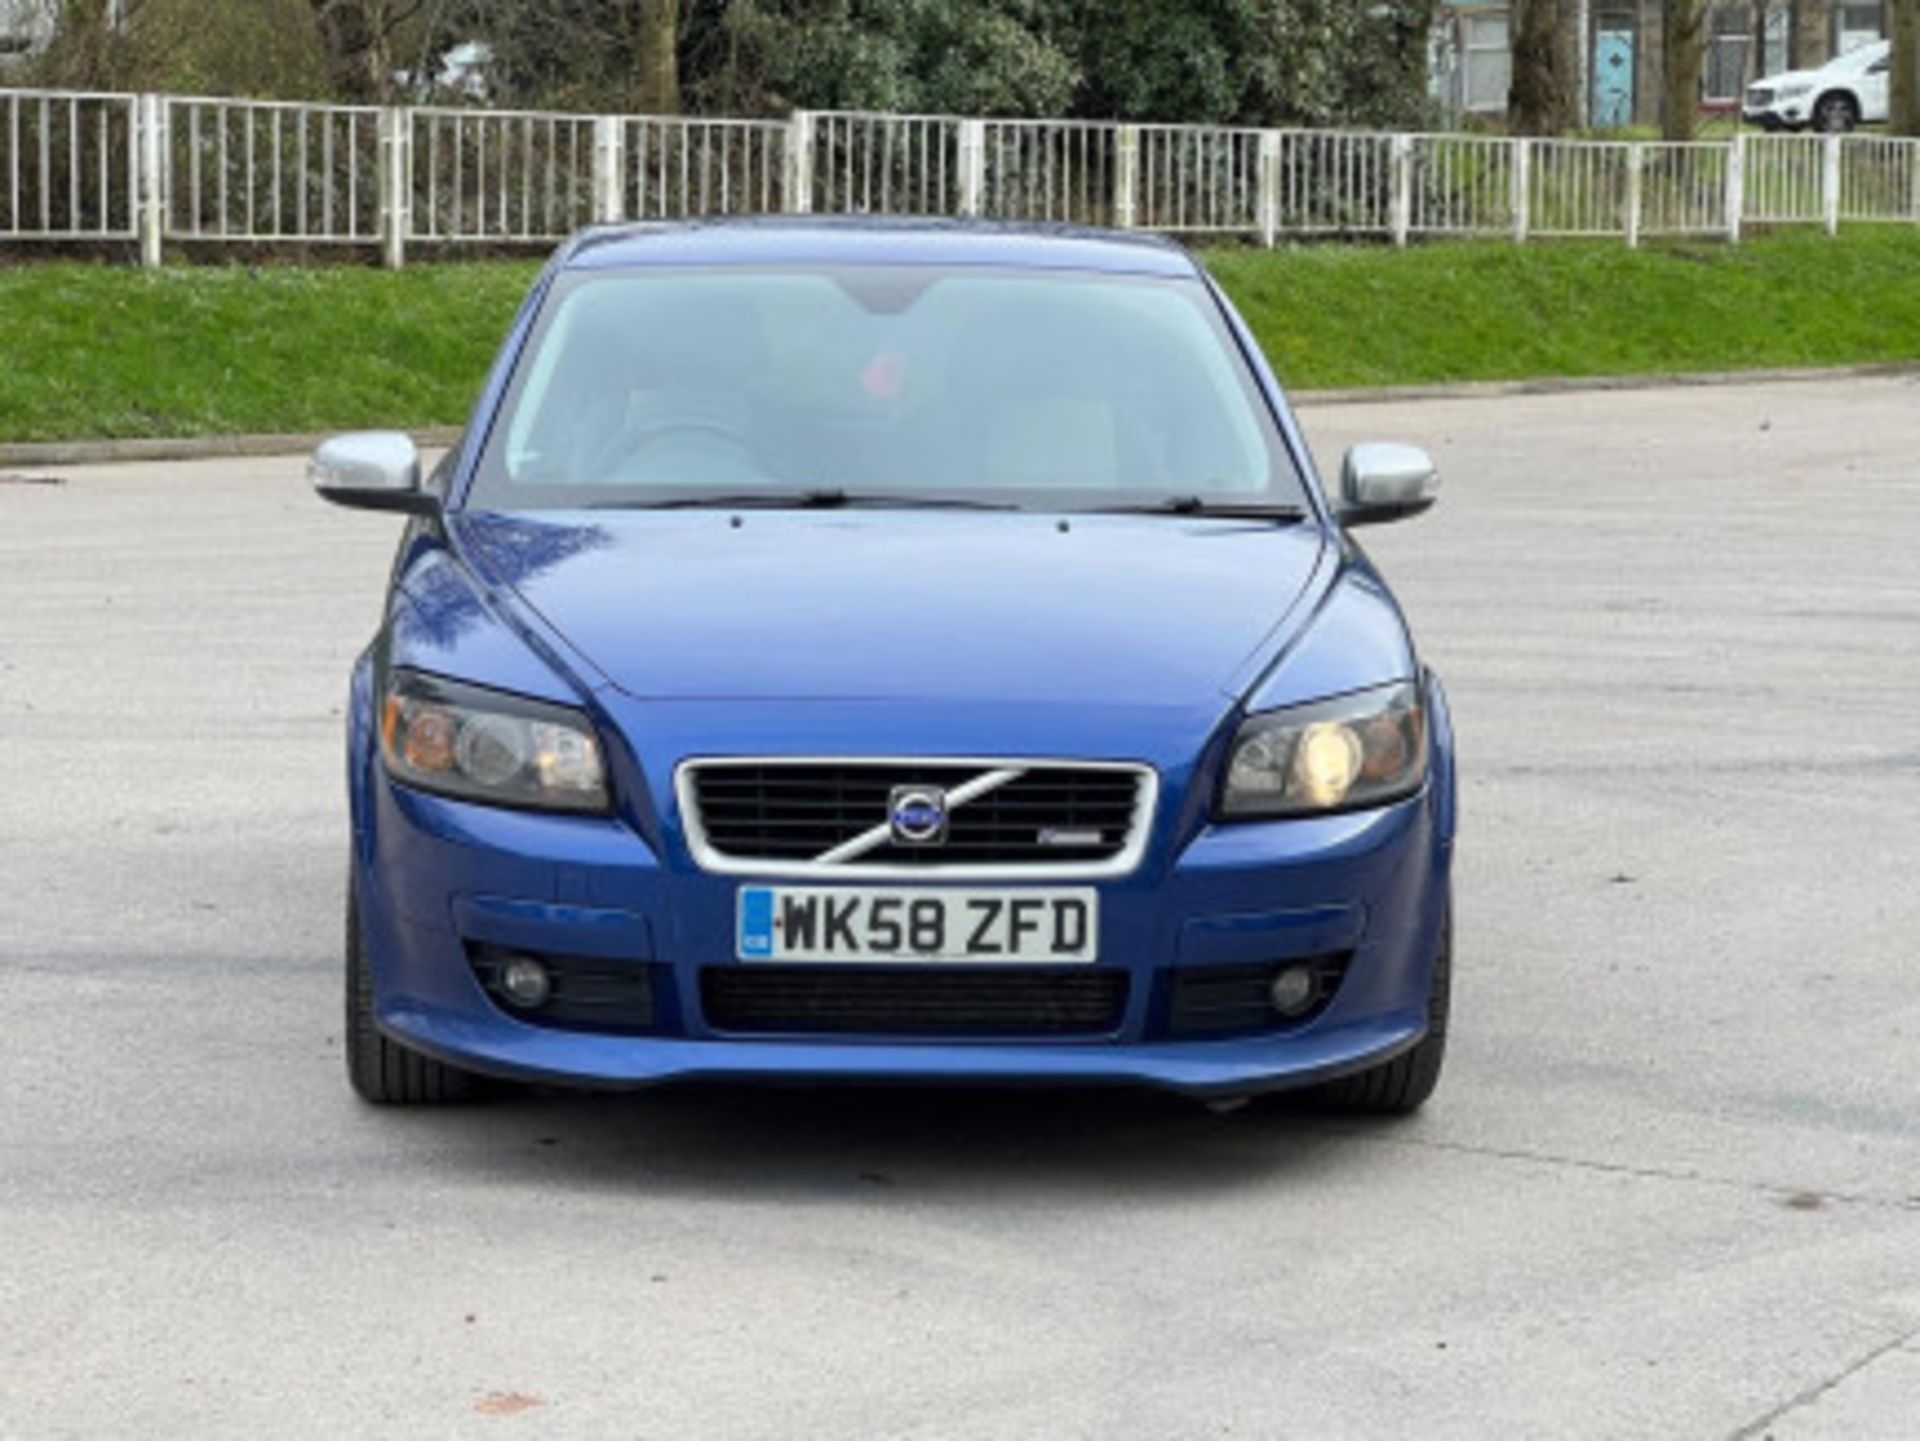 VOLVO C30 2.0D R-DESIGN SPORT 2DR - SPORTY AND LUXURIOUS COMPACT CAR >>--NO VAT ON HAMMER--<< - Image 45 of 103